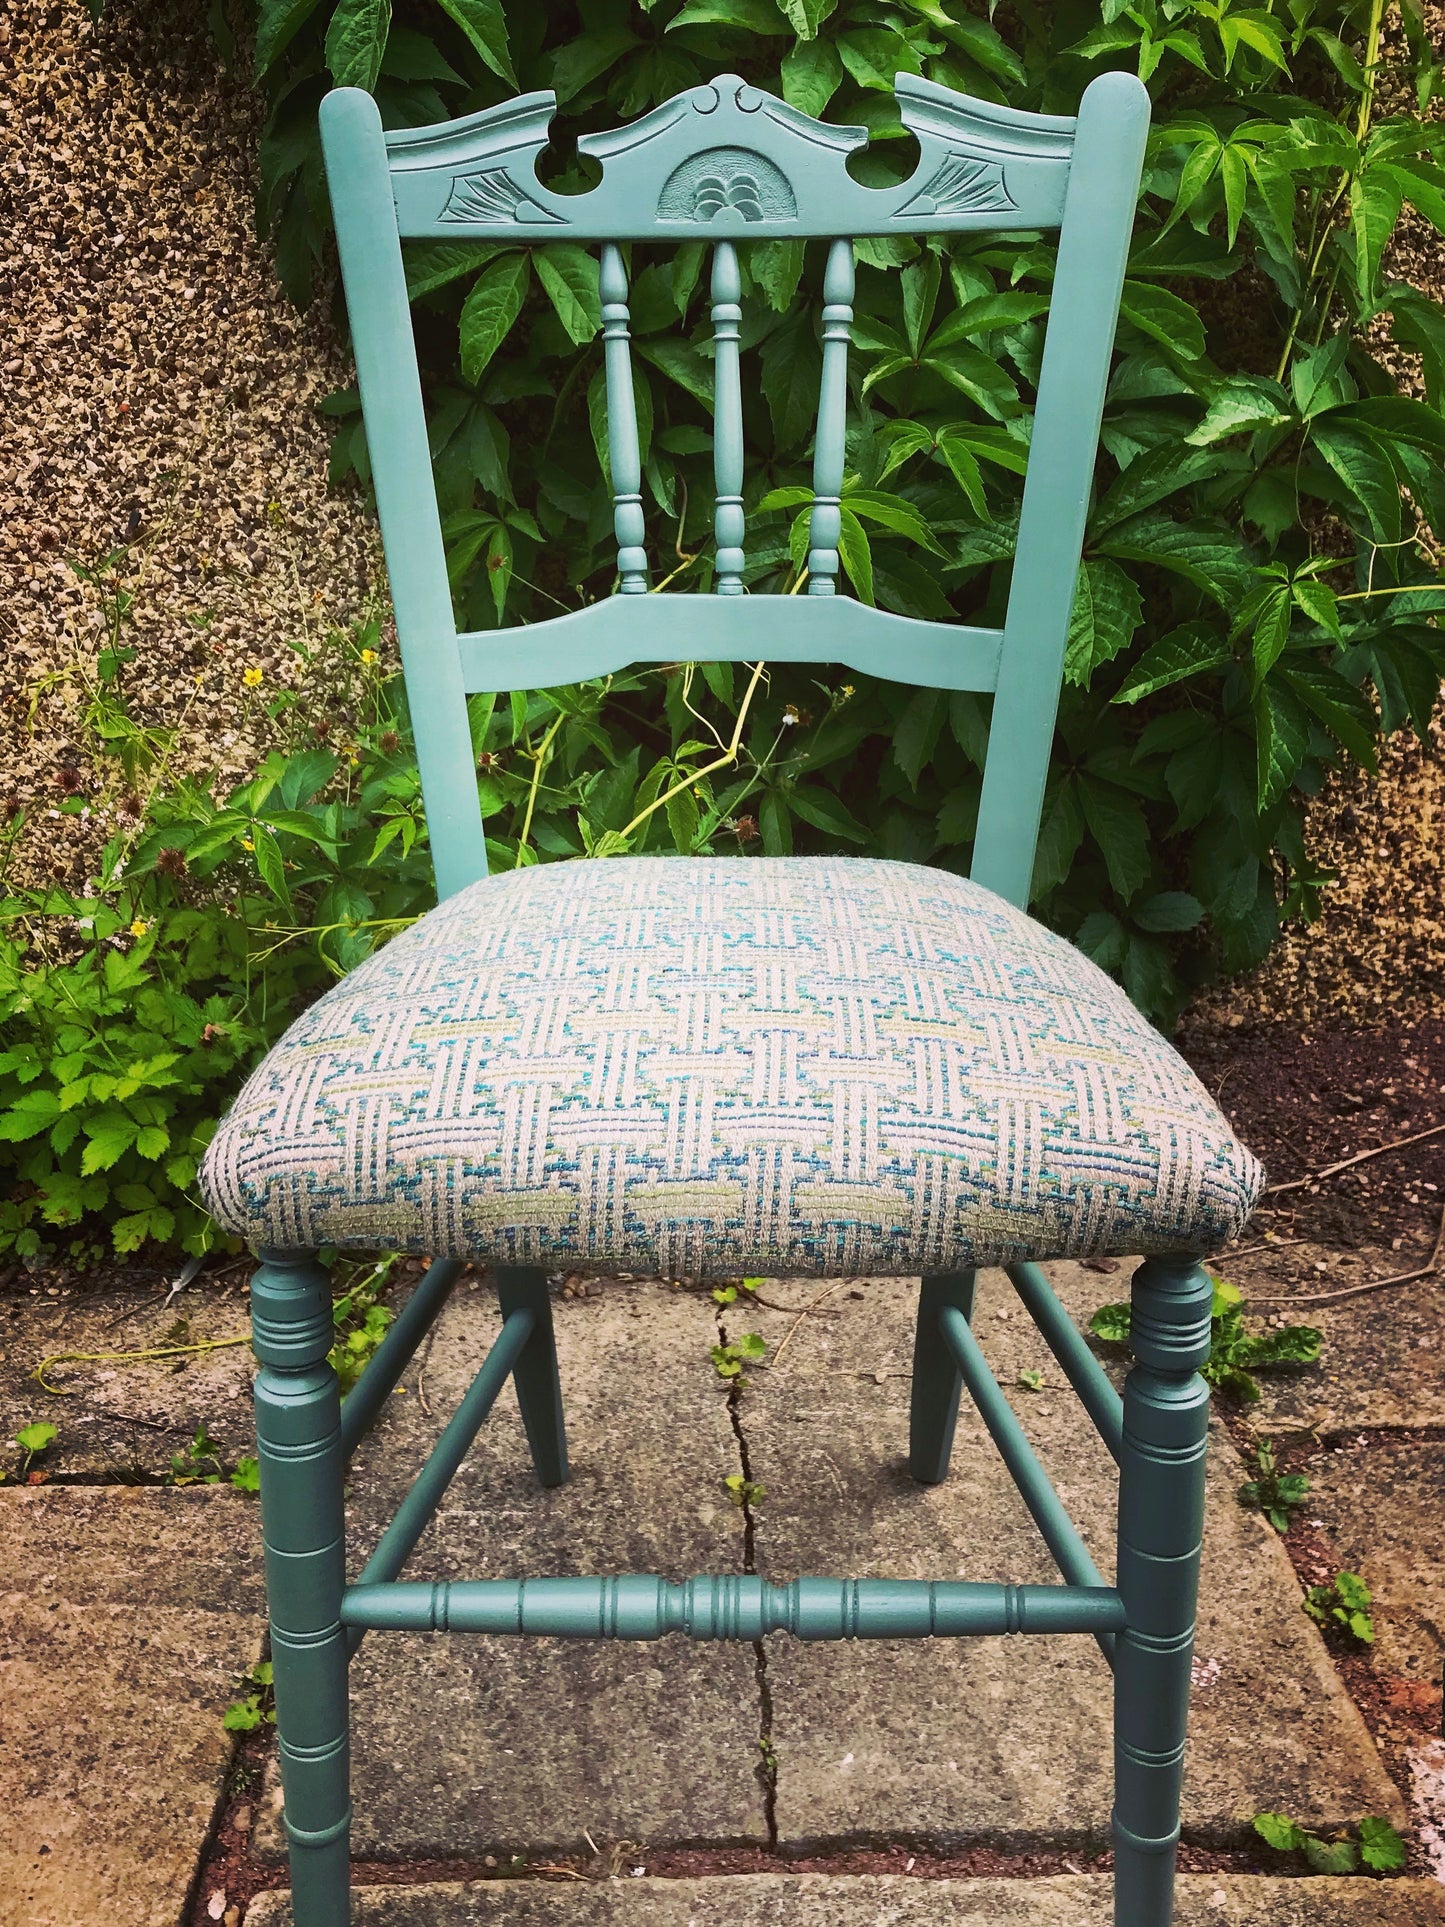 Re-upholstered matching or mismatched vintage dining chairs refinished to order